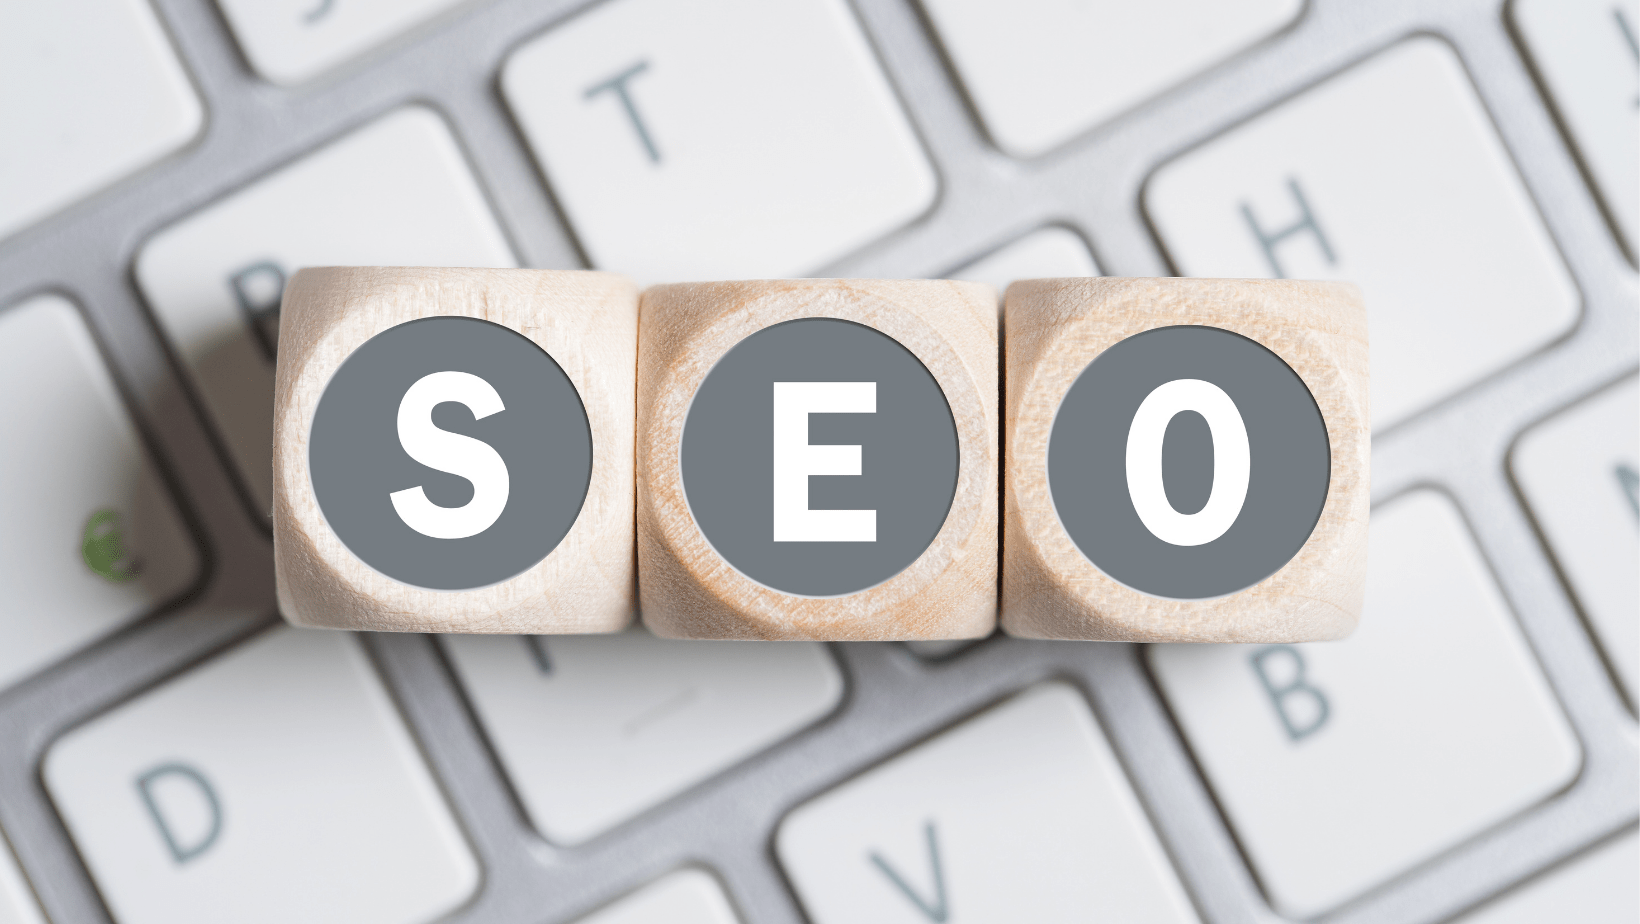 Can your SEO efforts be influenced by paid search?